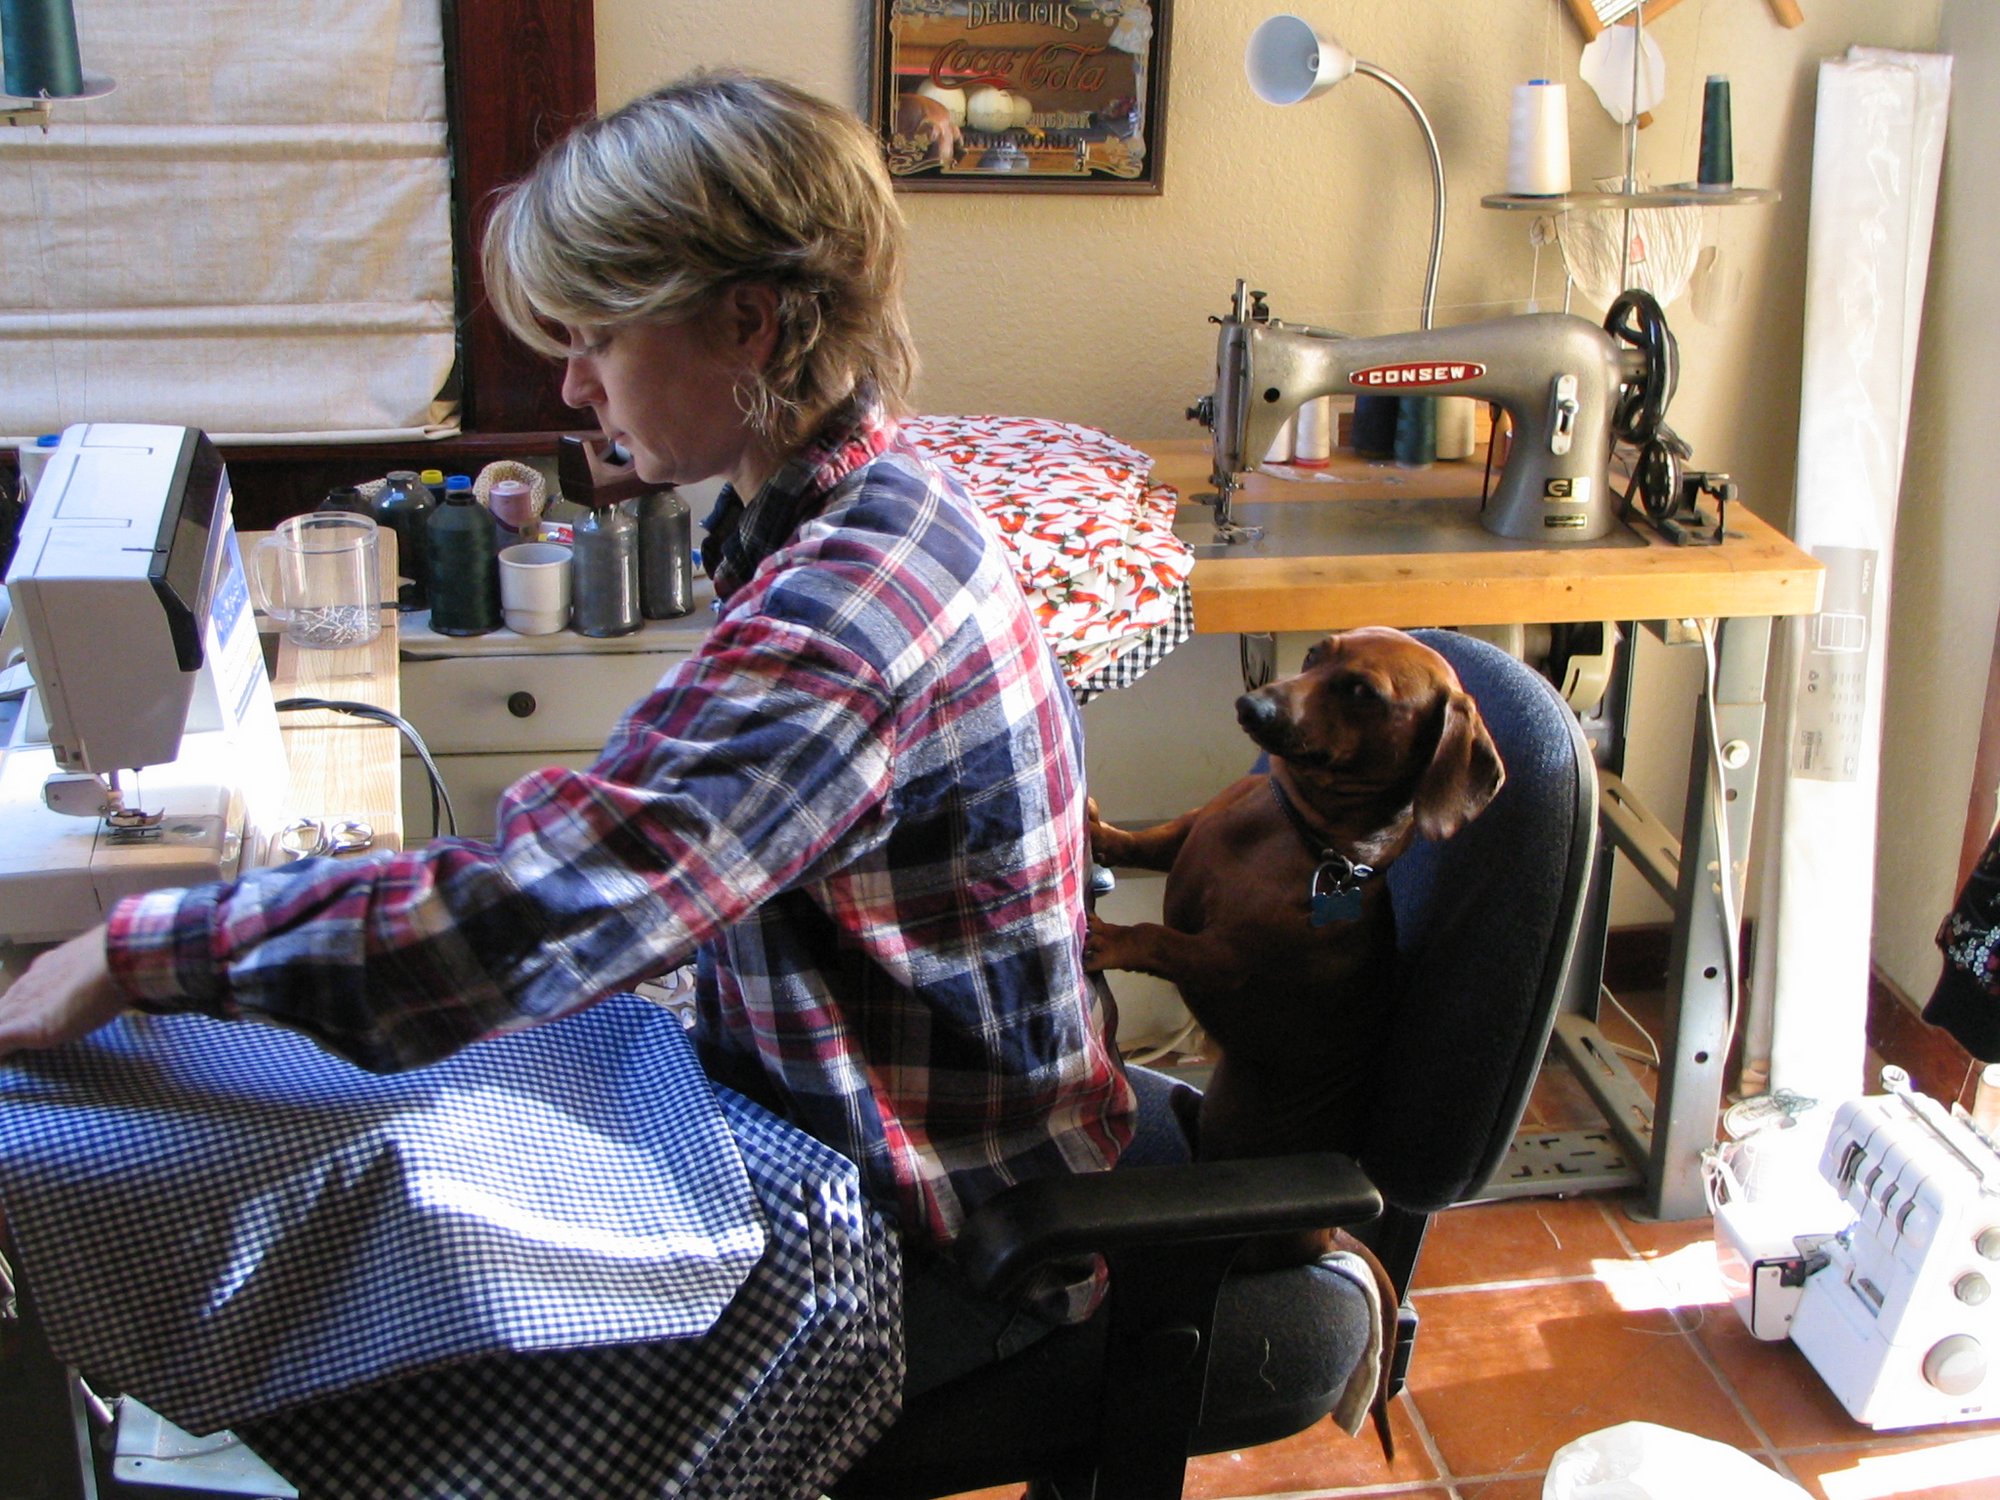 A woman sitting in a chair with a Dachshund behind her